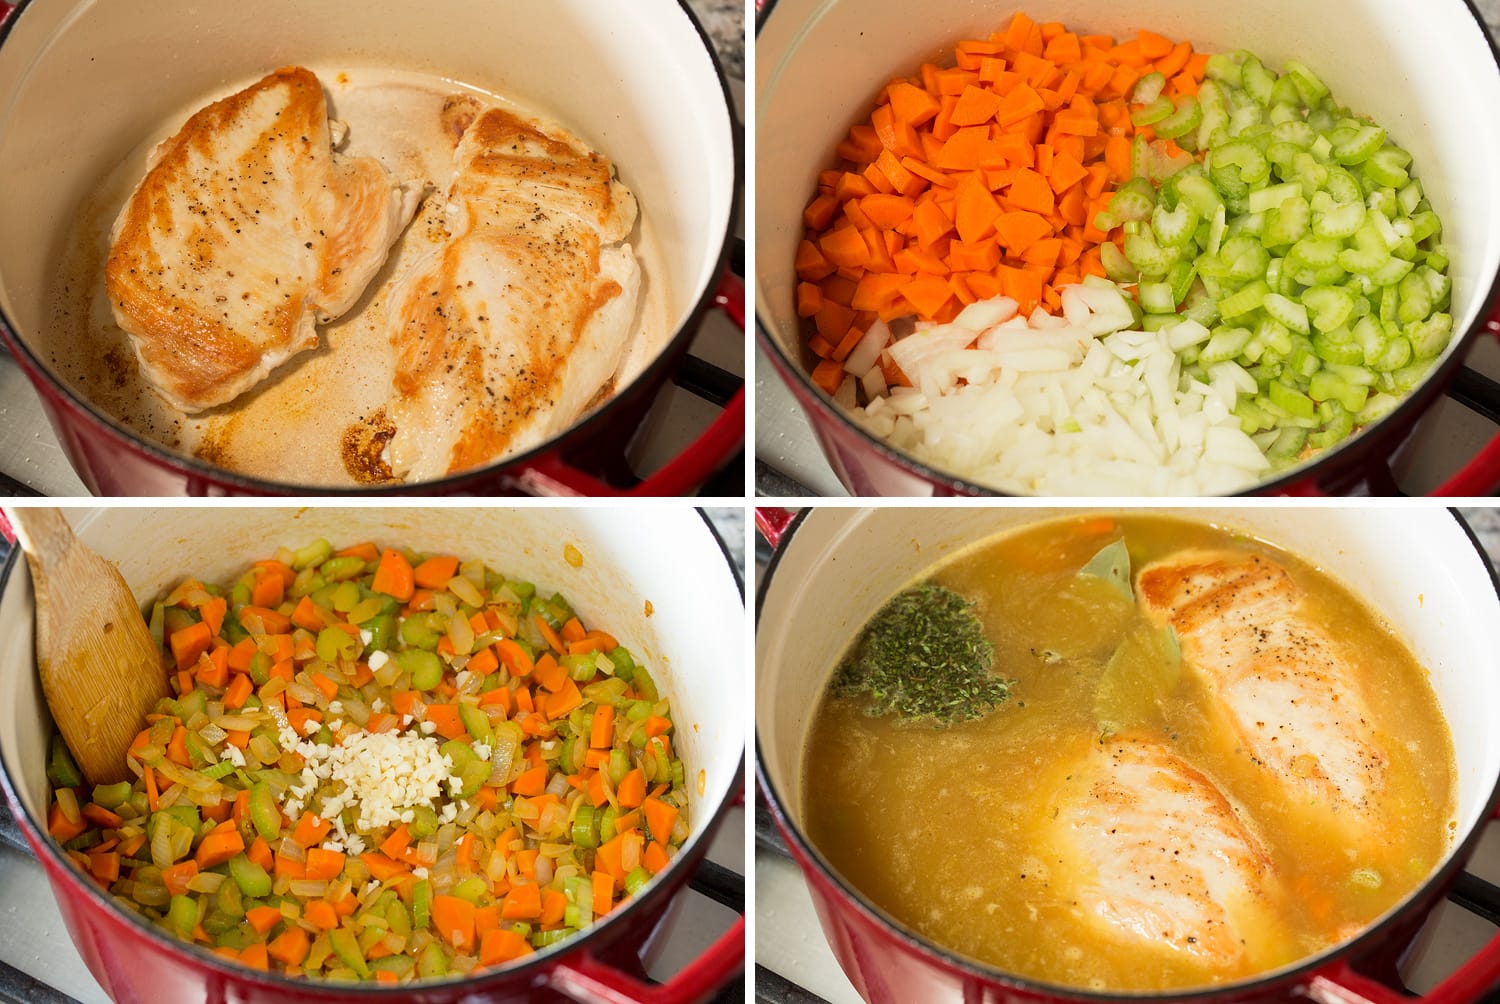 Steps to brown chicken breasts for soup, saute vegetables and add broth.